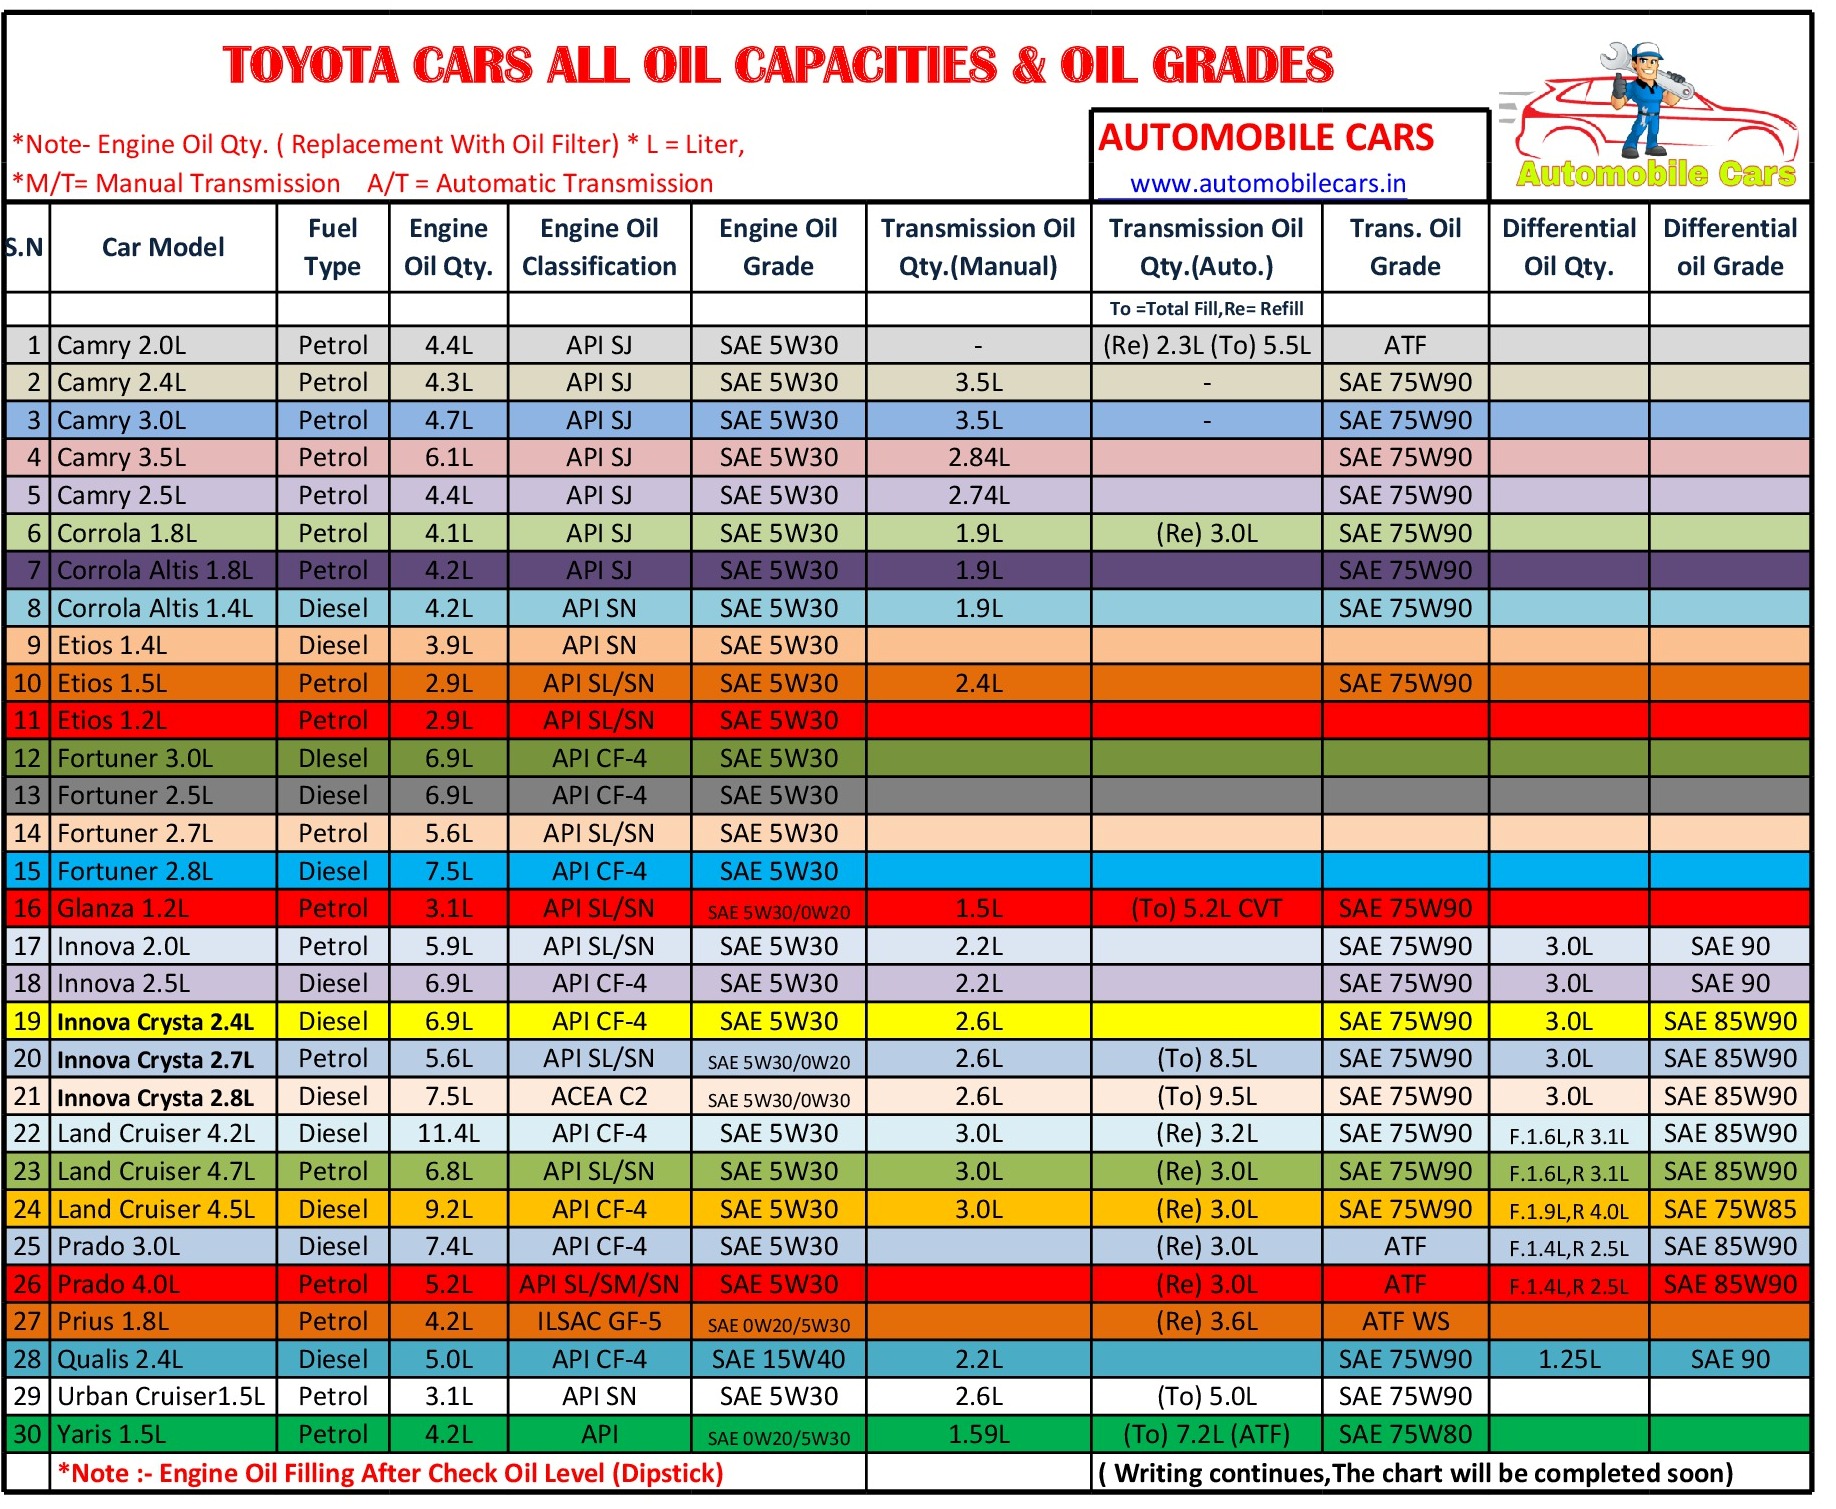 TOYOTA CARS ENGINE OIL/GEAR OIL CAPACITY AND GRADES